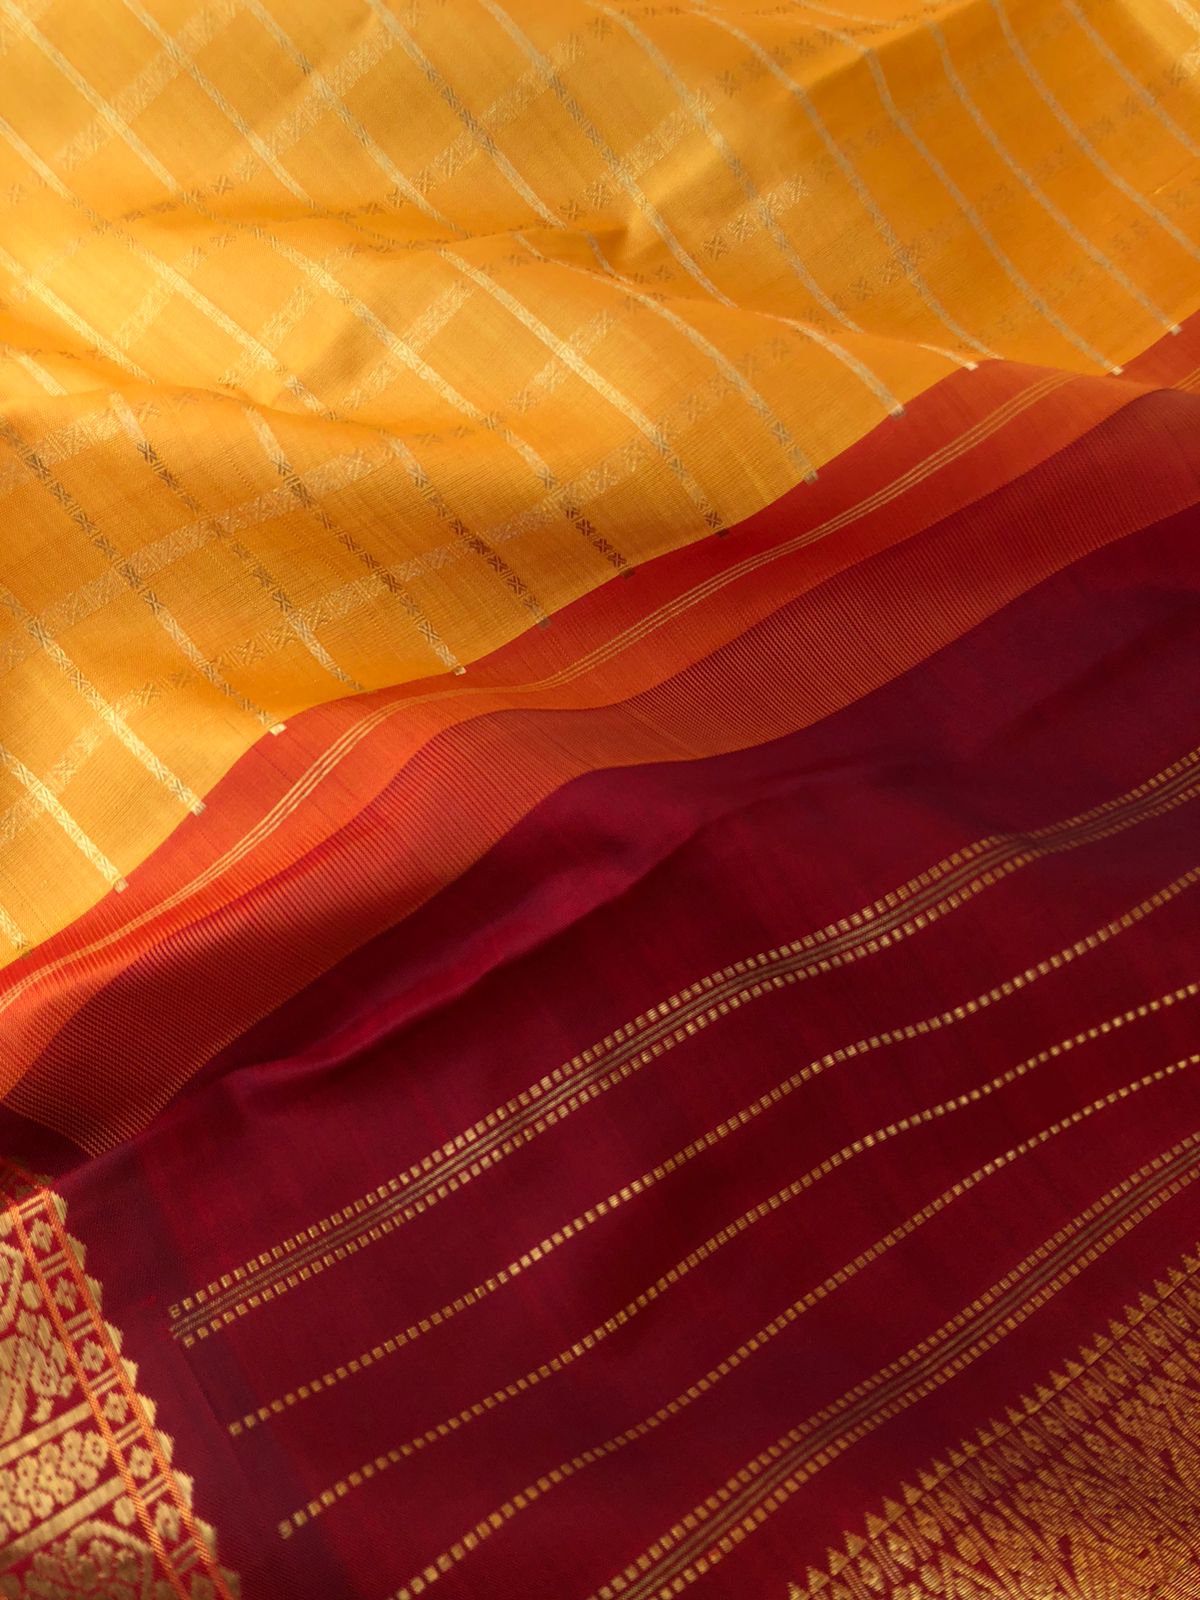 Vintage Ragas on Kanchivaram - the traditional at the best of classy mustard red and maroon with thutripoo woven chex with korvai woven retta pett borders